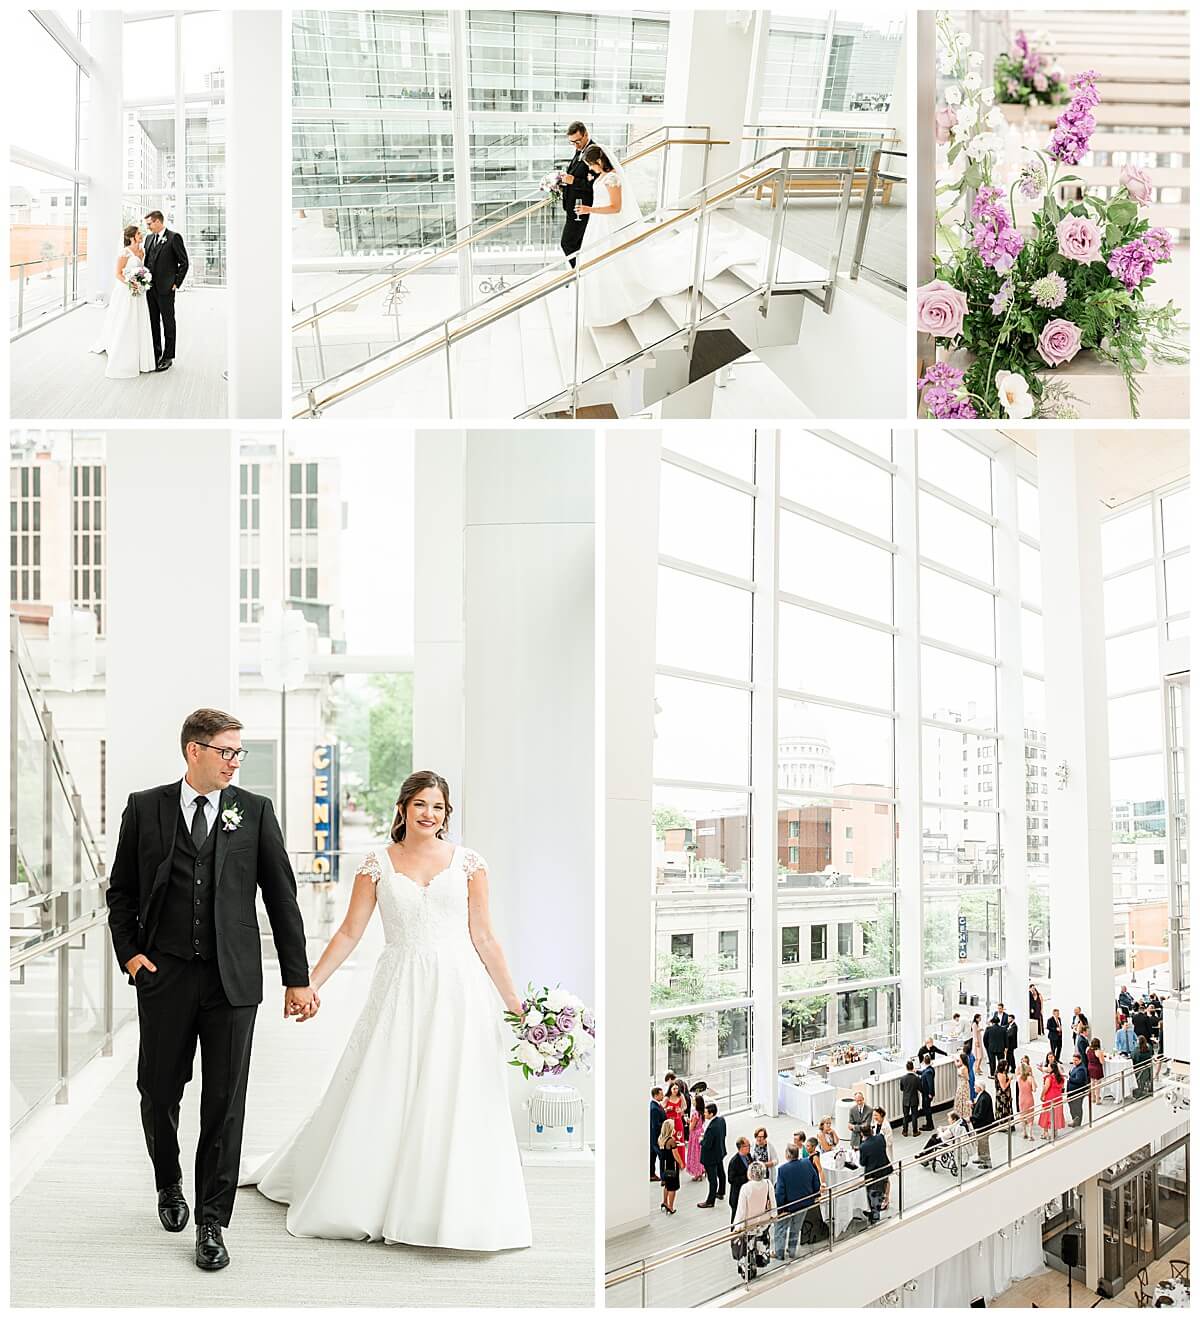 Collage of wedding photos from the Overture Center in Madison, featuring a crowd at cocktail hour, a bride and groom walking down the staircase, and flowers on the stairs